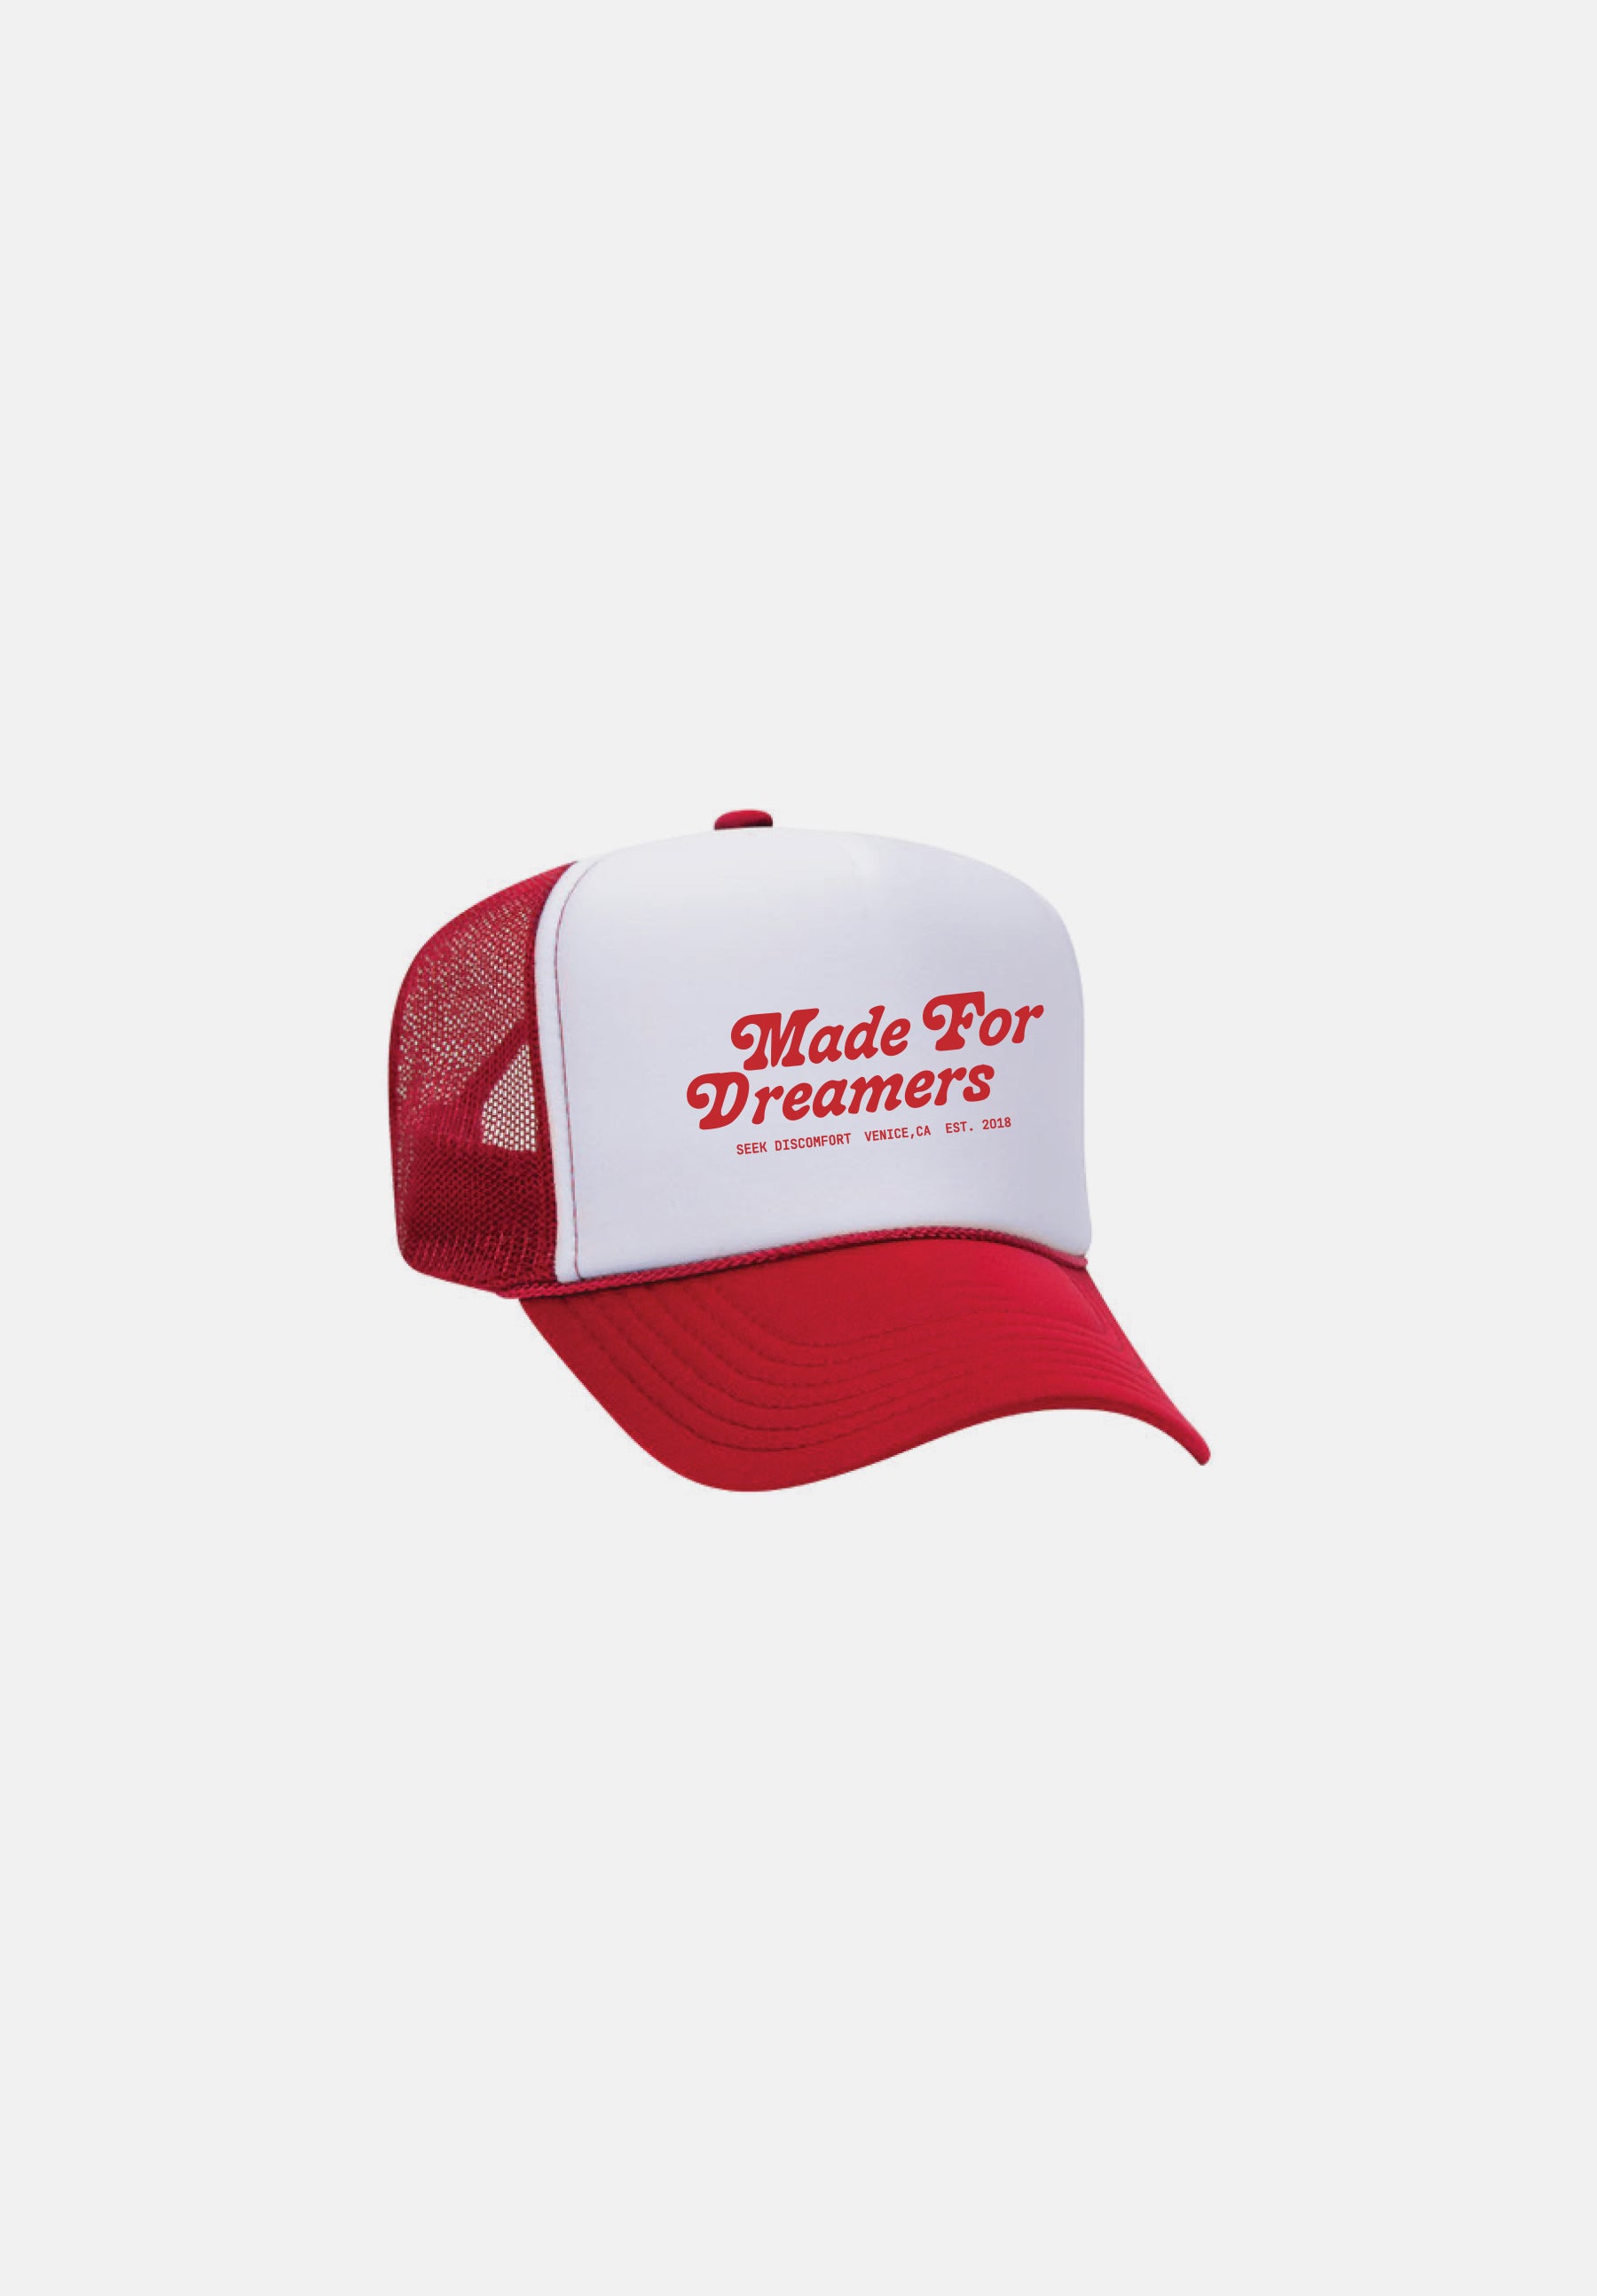 Seek For Hat – Discomfort Trucker Made Red Dreamers